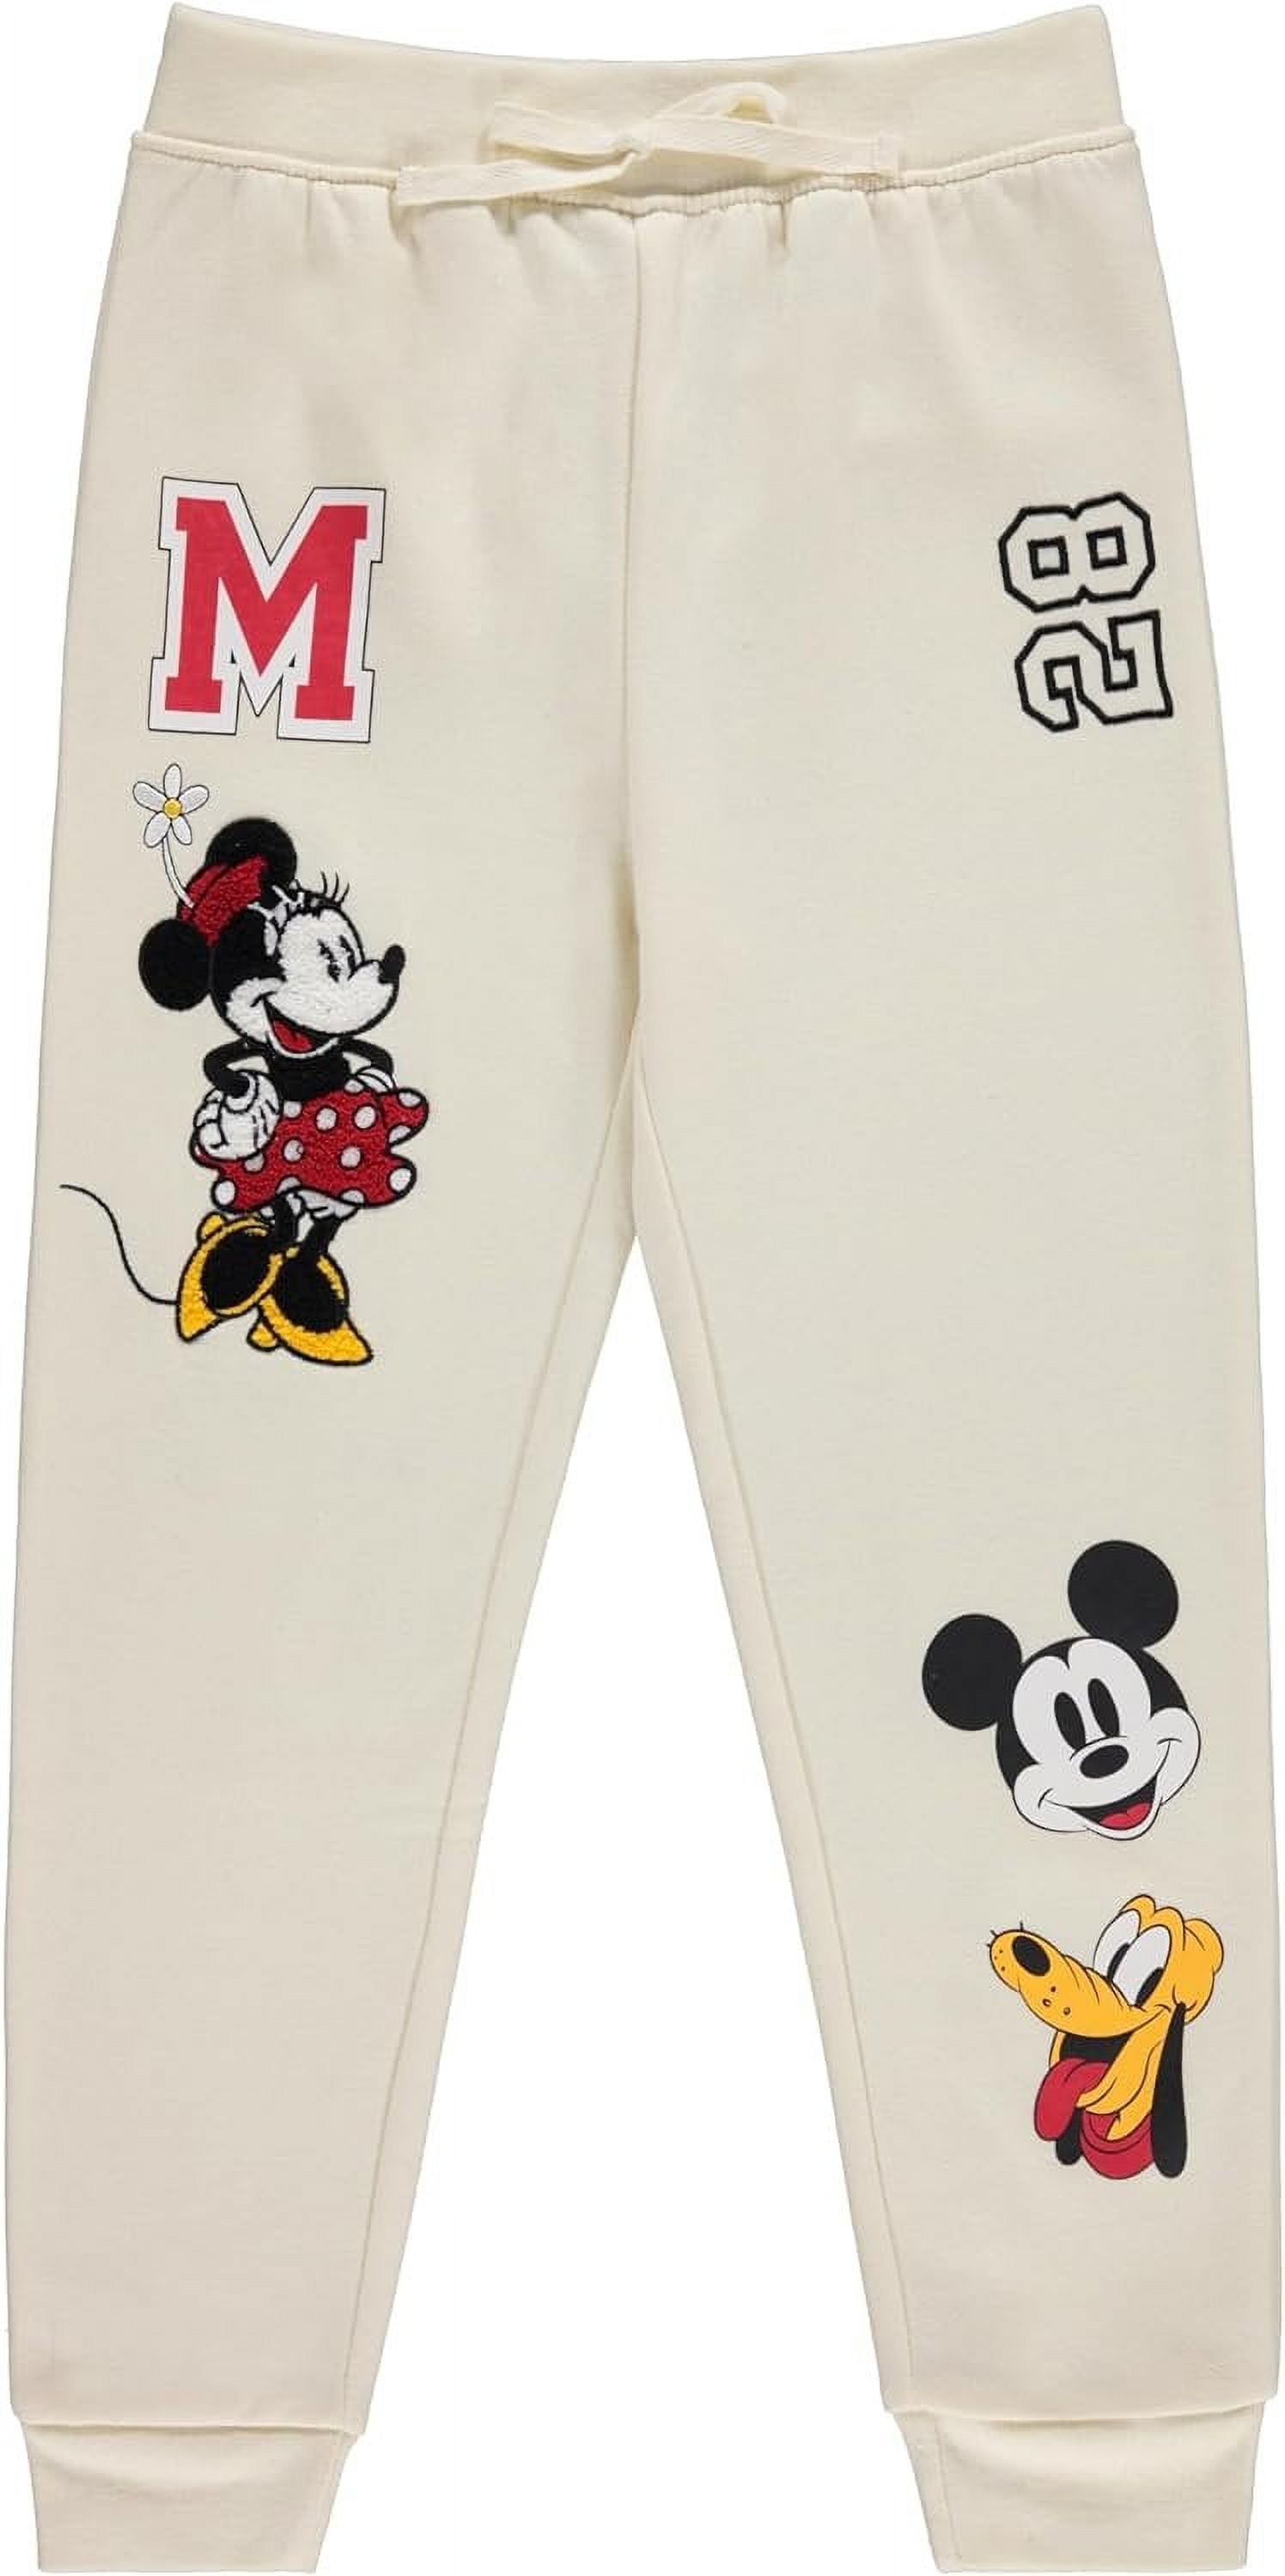 DISNEY Girls Lilo and Stitch Jogger Sweatpants with Minnie Mouse  Princesses, Little and Big Girls Sizes 4-16